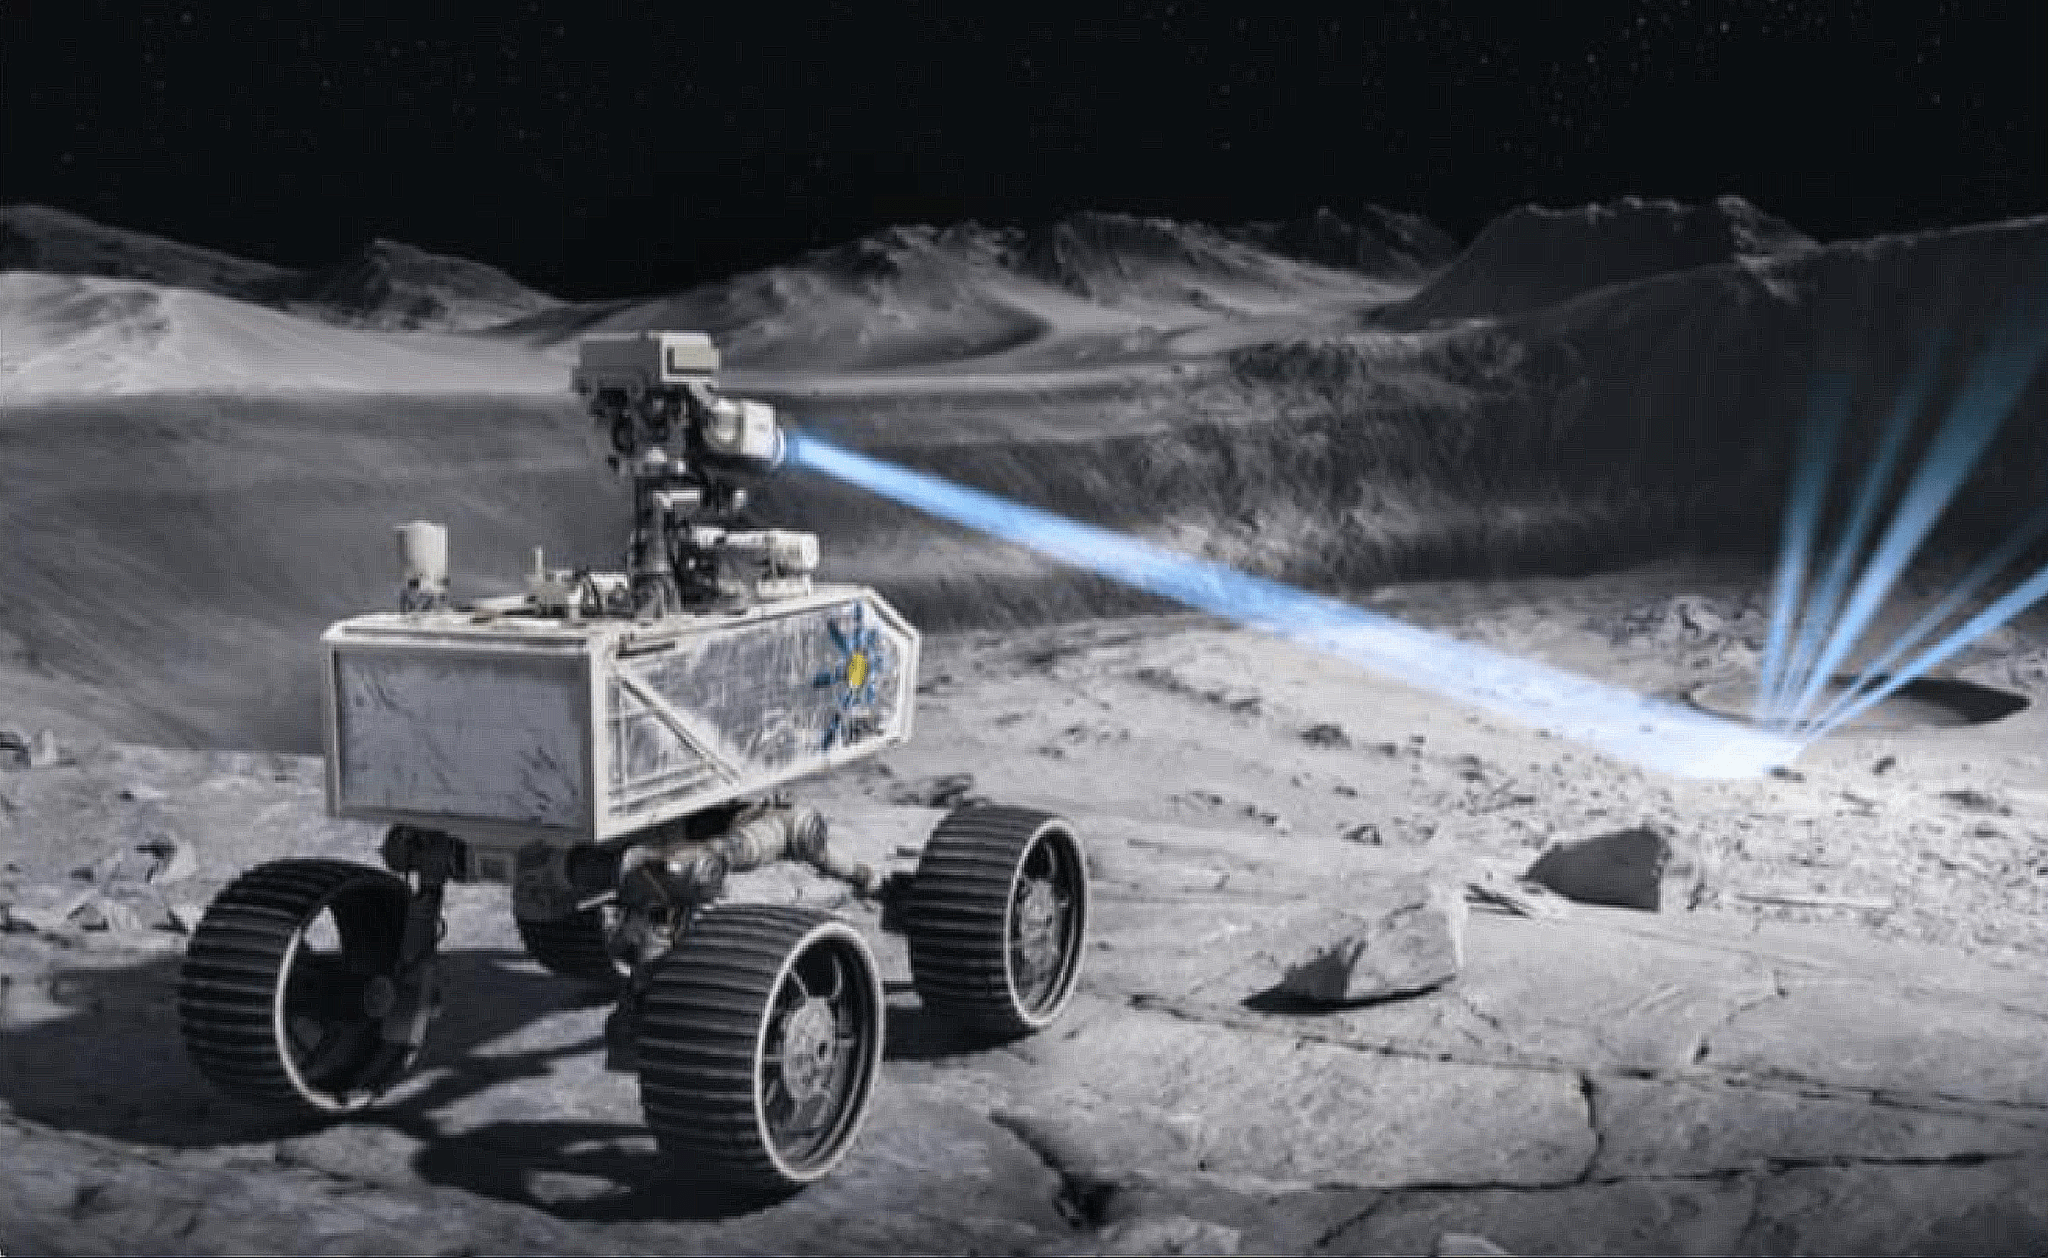 EmberCore Flashlight: Long Distance Lunar Characterization with